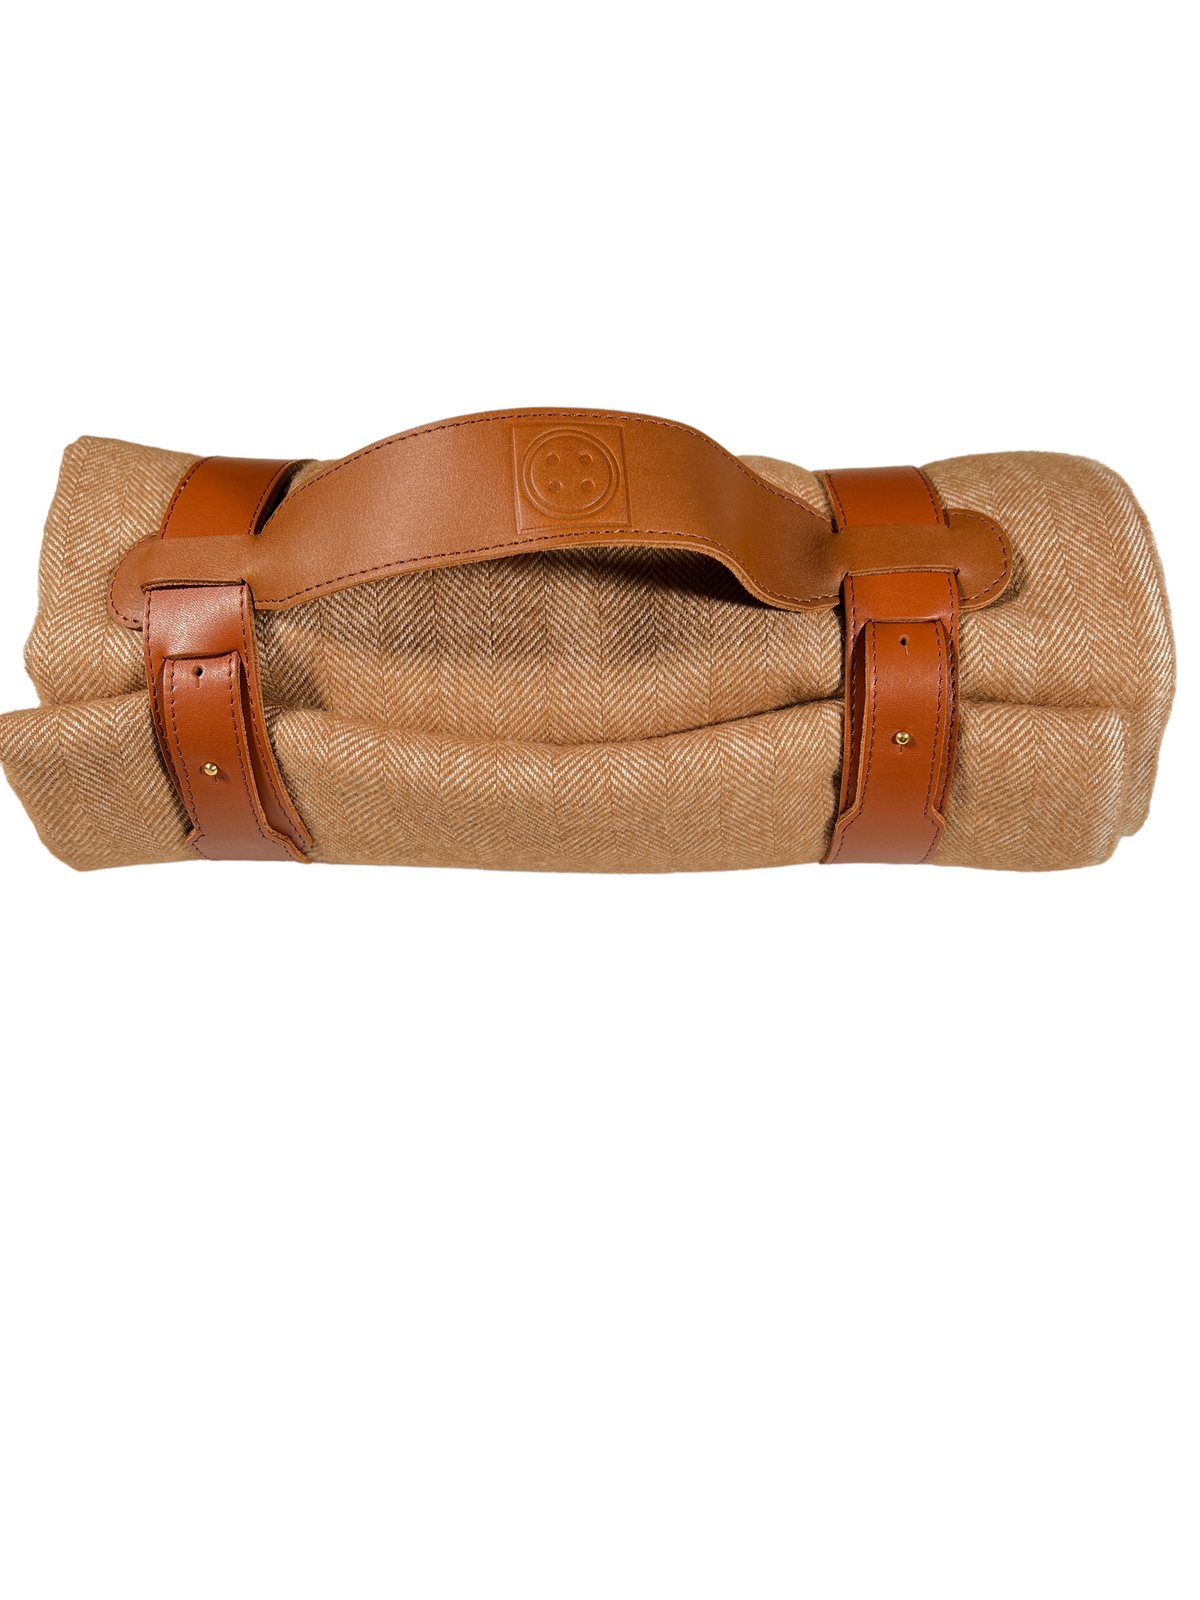 BUTTON DOWN ALPACA HERRINGBONE THROW WITH LEATHER CARRIER - CAMEL & WHITE